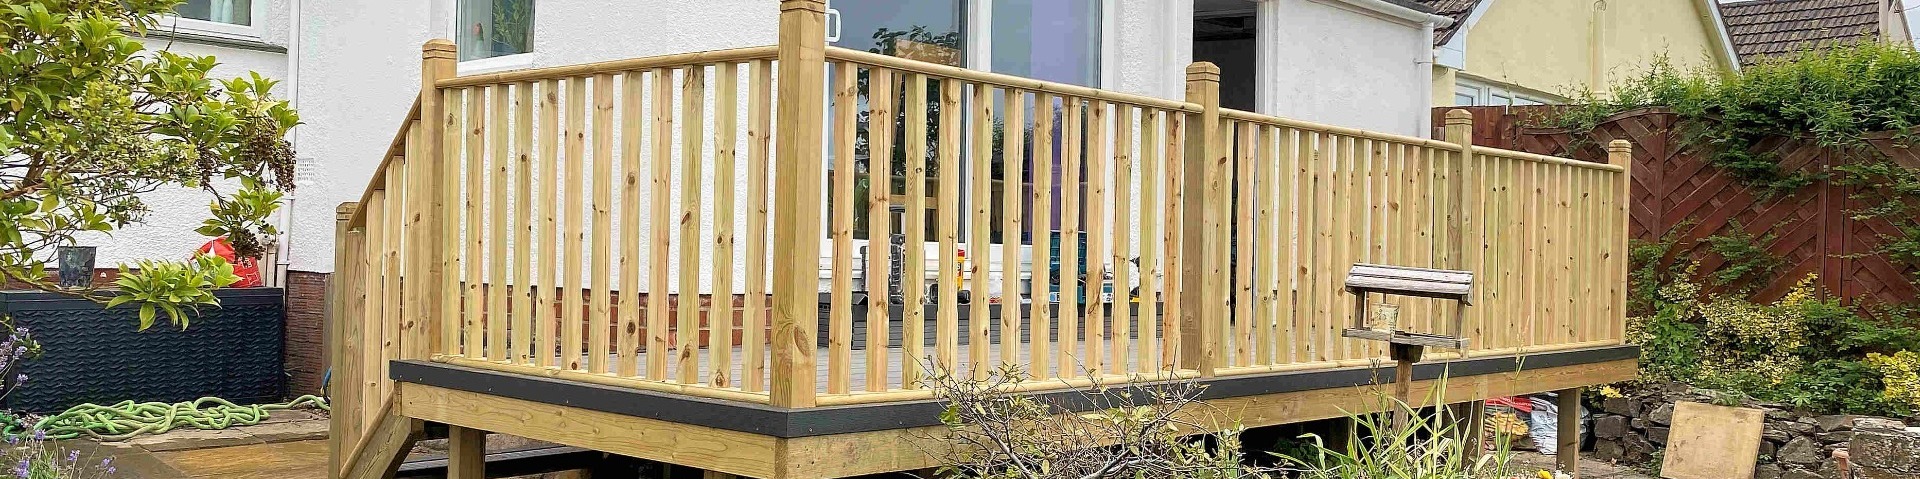 Decking extension created and installed in North Devon